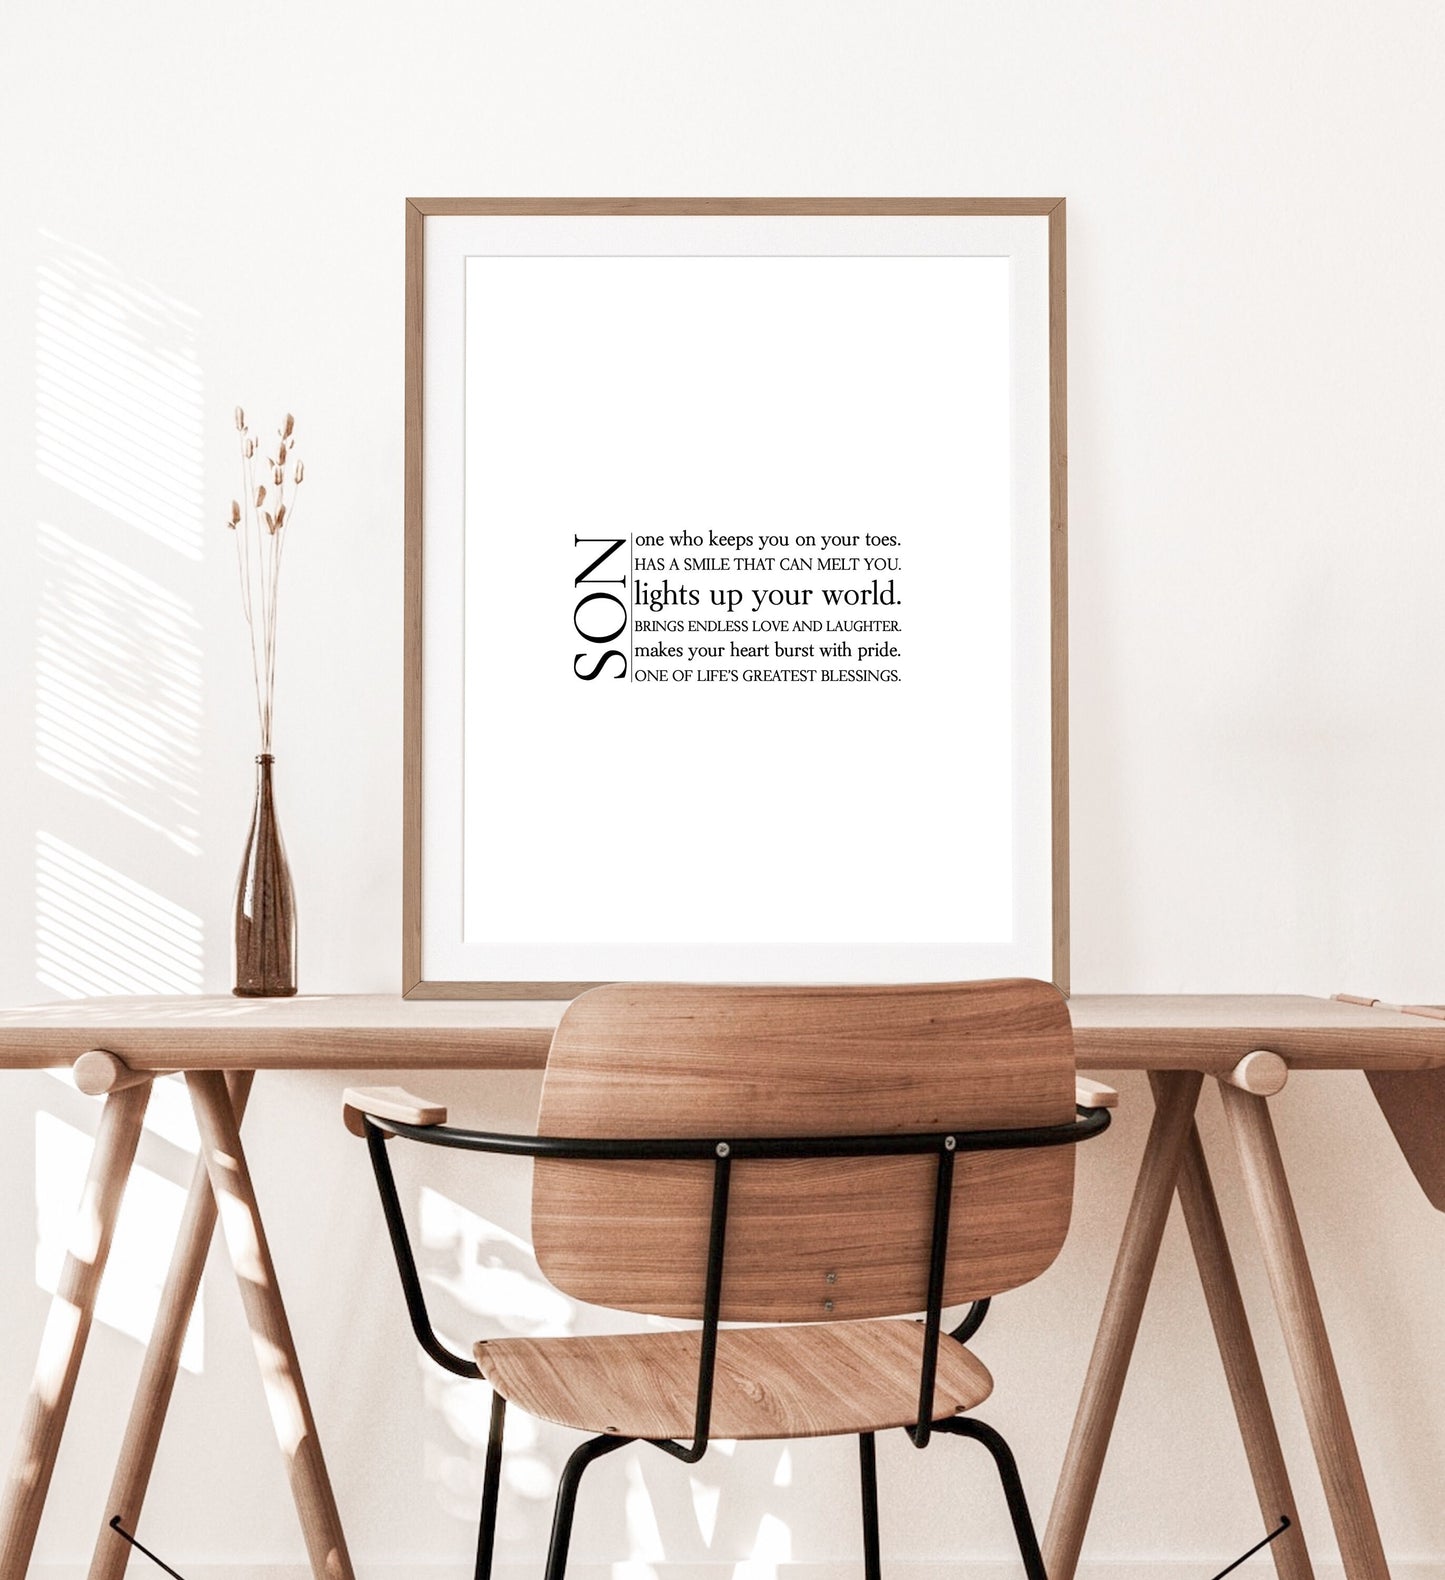 Son definition,Son definition print,Son print,Gift for Son,Son birthday gift,Son definition,Son quote,Gift from Mom,Gift from parents